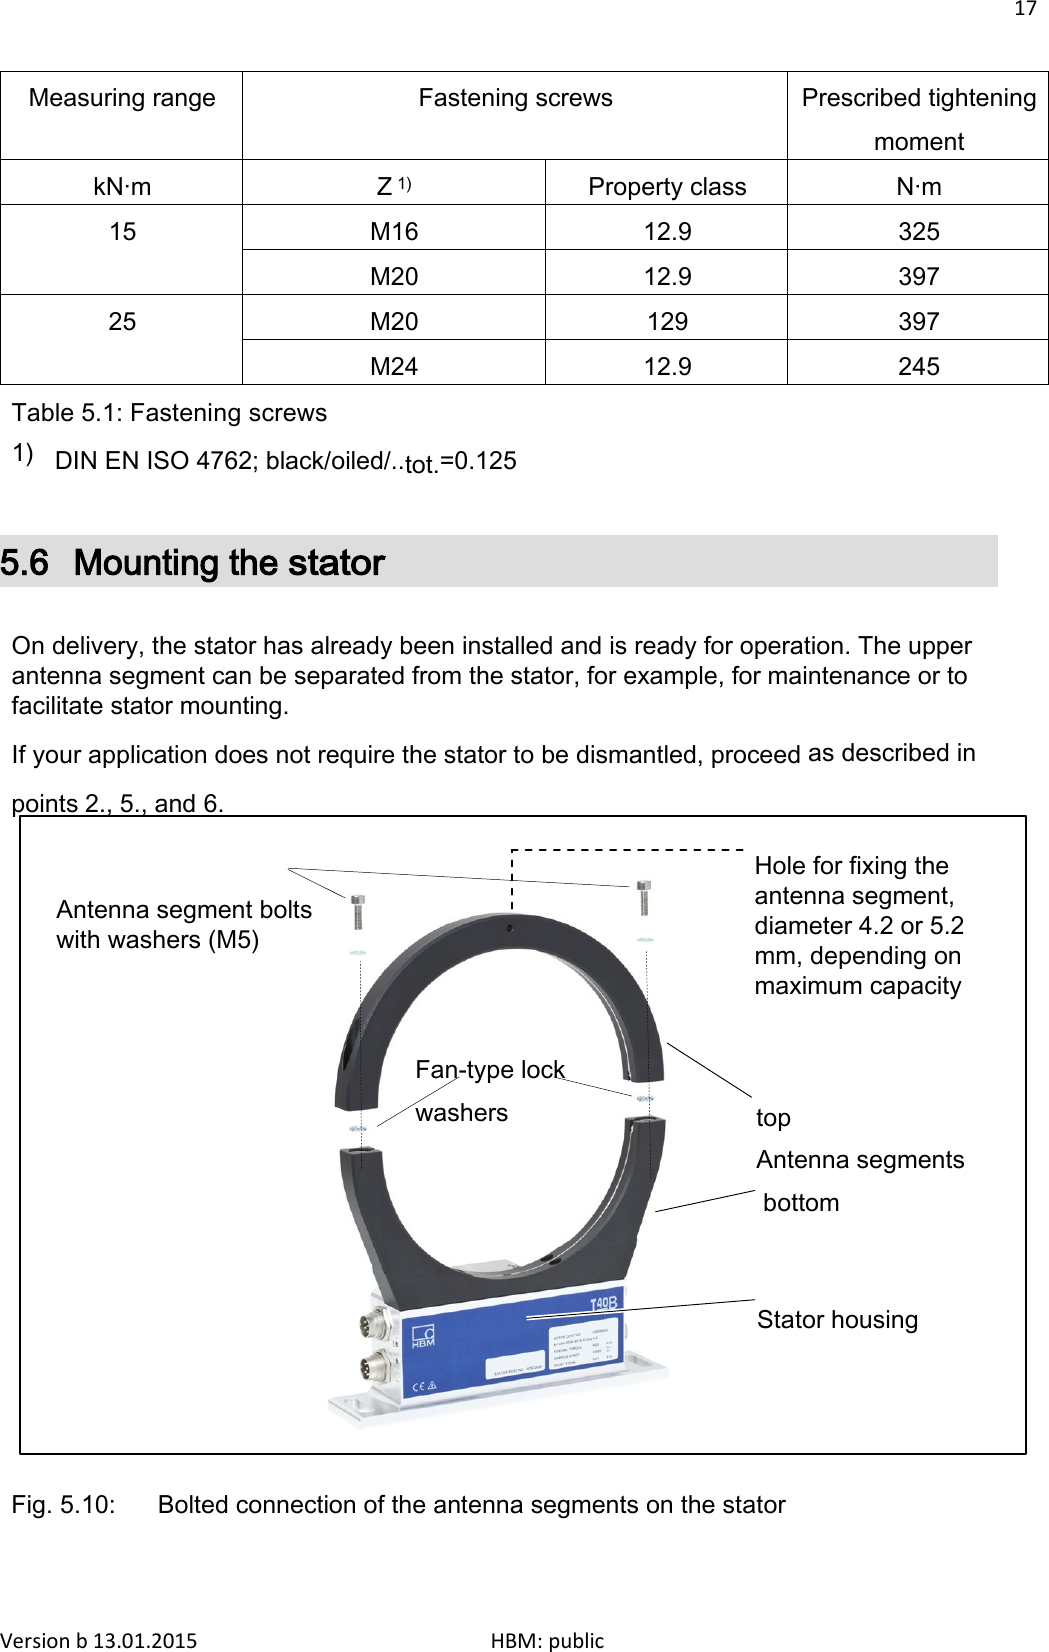 17   Measuring range Fastening screws Prescribed tightening moment kN·m  Z 1) Property class N·m 15 M16 12.9 325 M20 12.9 397 25 M20 129 397 M24 12.9 245 Table 5.1: Fastening screws 1)   DIN EN ISO 4762; black/oiled/..tot.=0.125  5.6 Mounting the stator   On delivery, the stator has already been installed and is ready for operation. The upper antenna segment can be separated from the stator, for example, for maintenance or to facilitate stator mounting. If your application does not require the stator to be dismantled, proceed as described in points 2., 5., and 6.    Antenna segment bolts with washers (M5)          Fan-type lock washers Hole for fixing the antenna segment, diameter 4.2 or 5.2 mm, depending on maximum capacity    top  Antenna segments  bottom     Stator housing        Fig. 5.10:  Bolted connection of the antenna segments on the stator Version b 13.01.2015                              HBM: public 